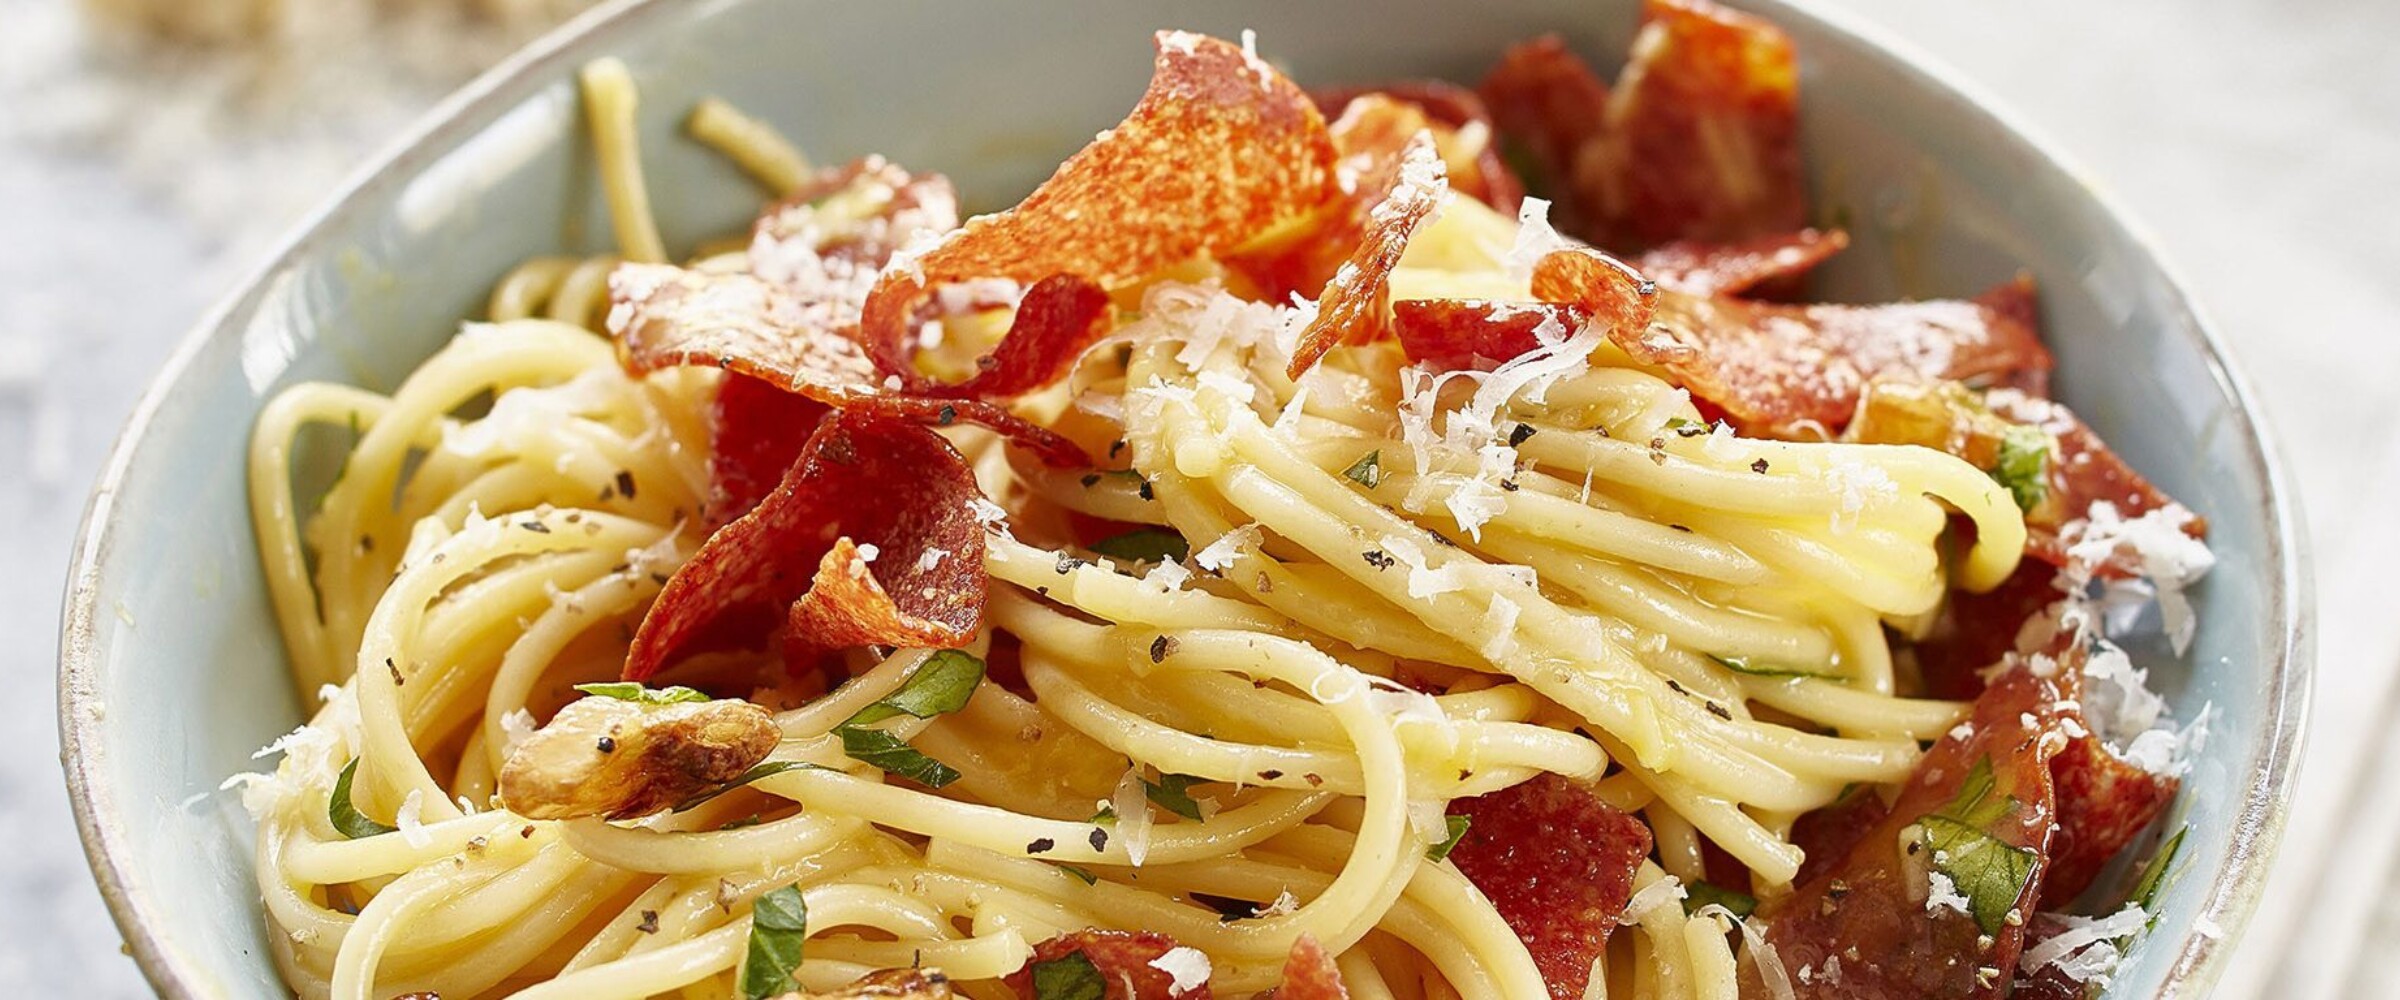 Carbonara with Salami on top in a white bowl